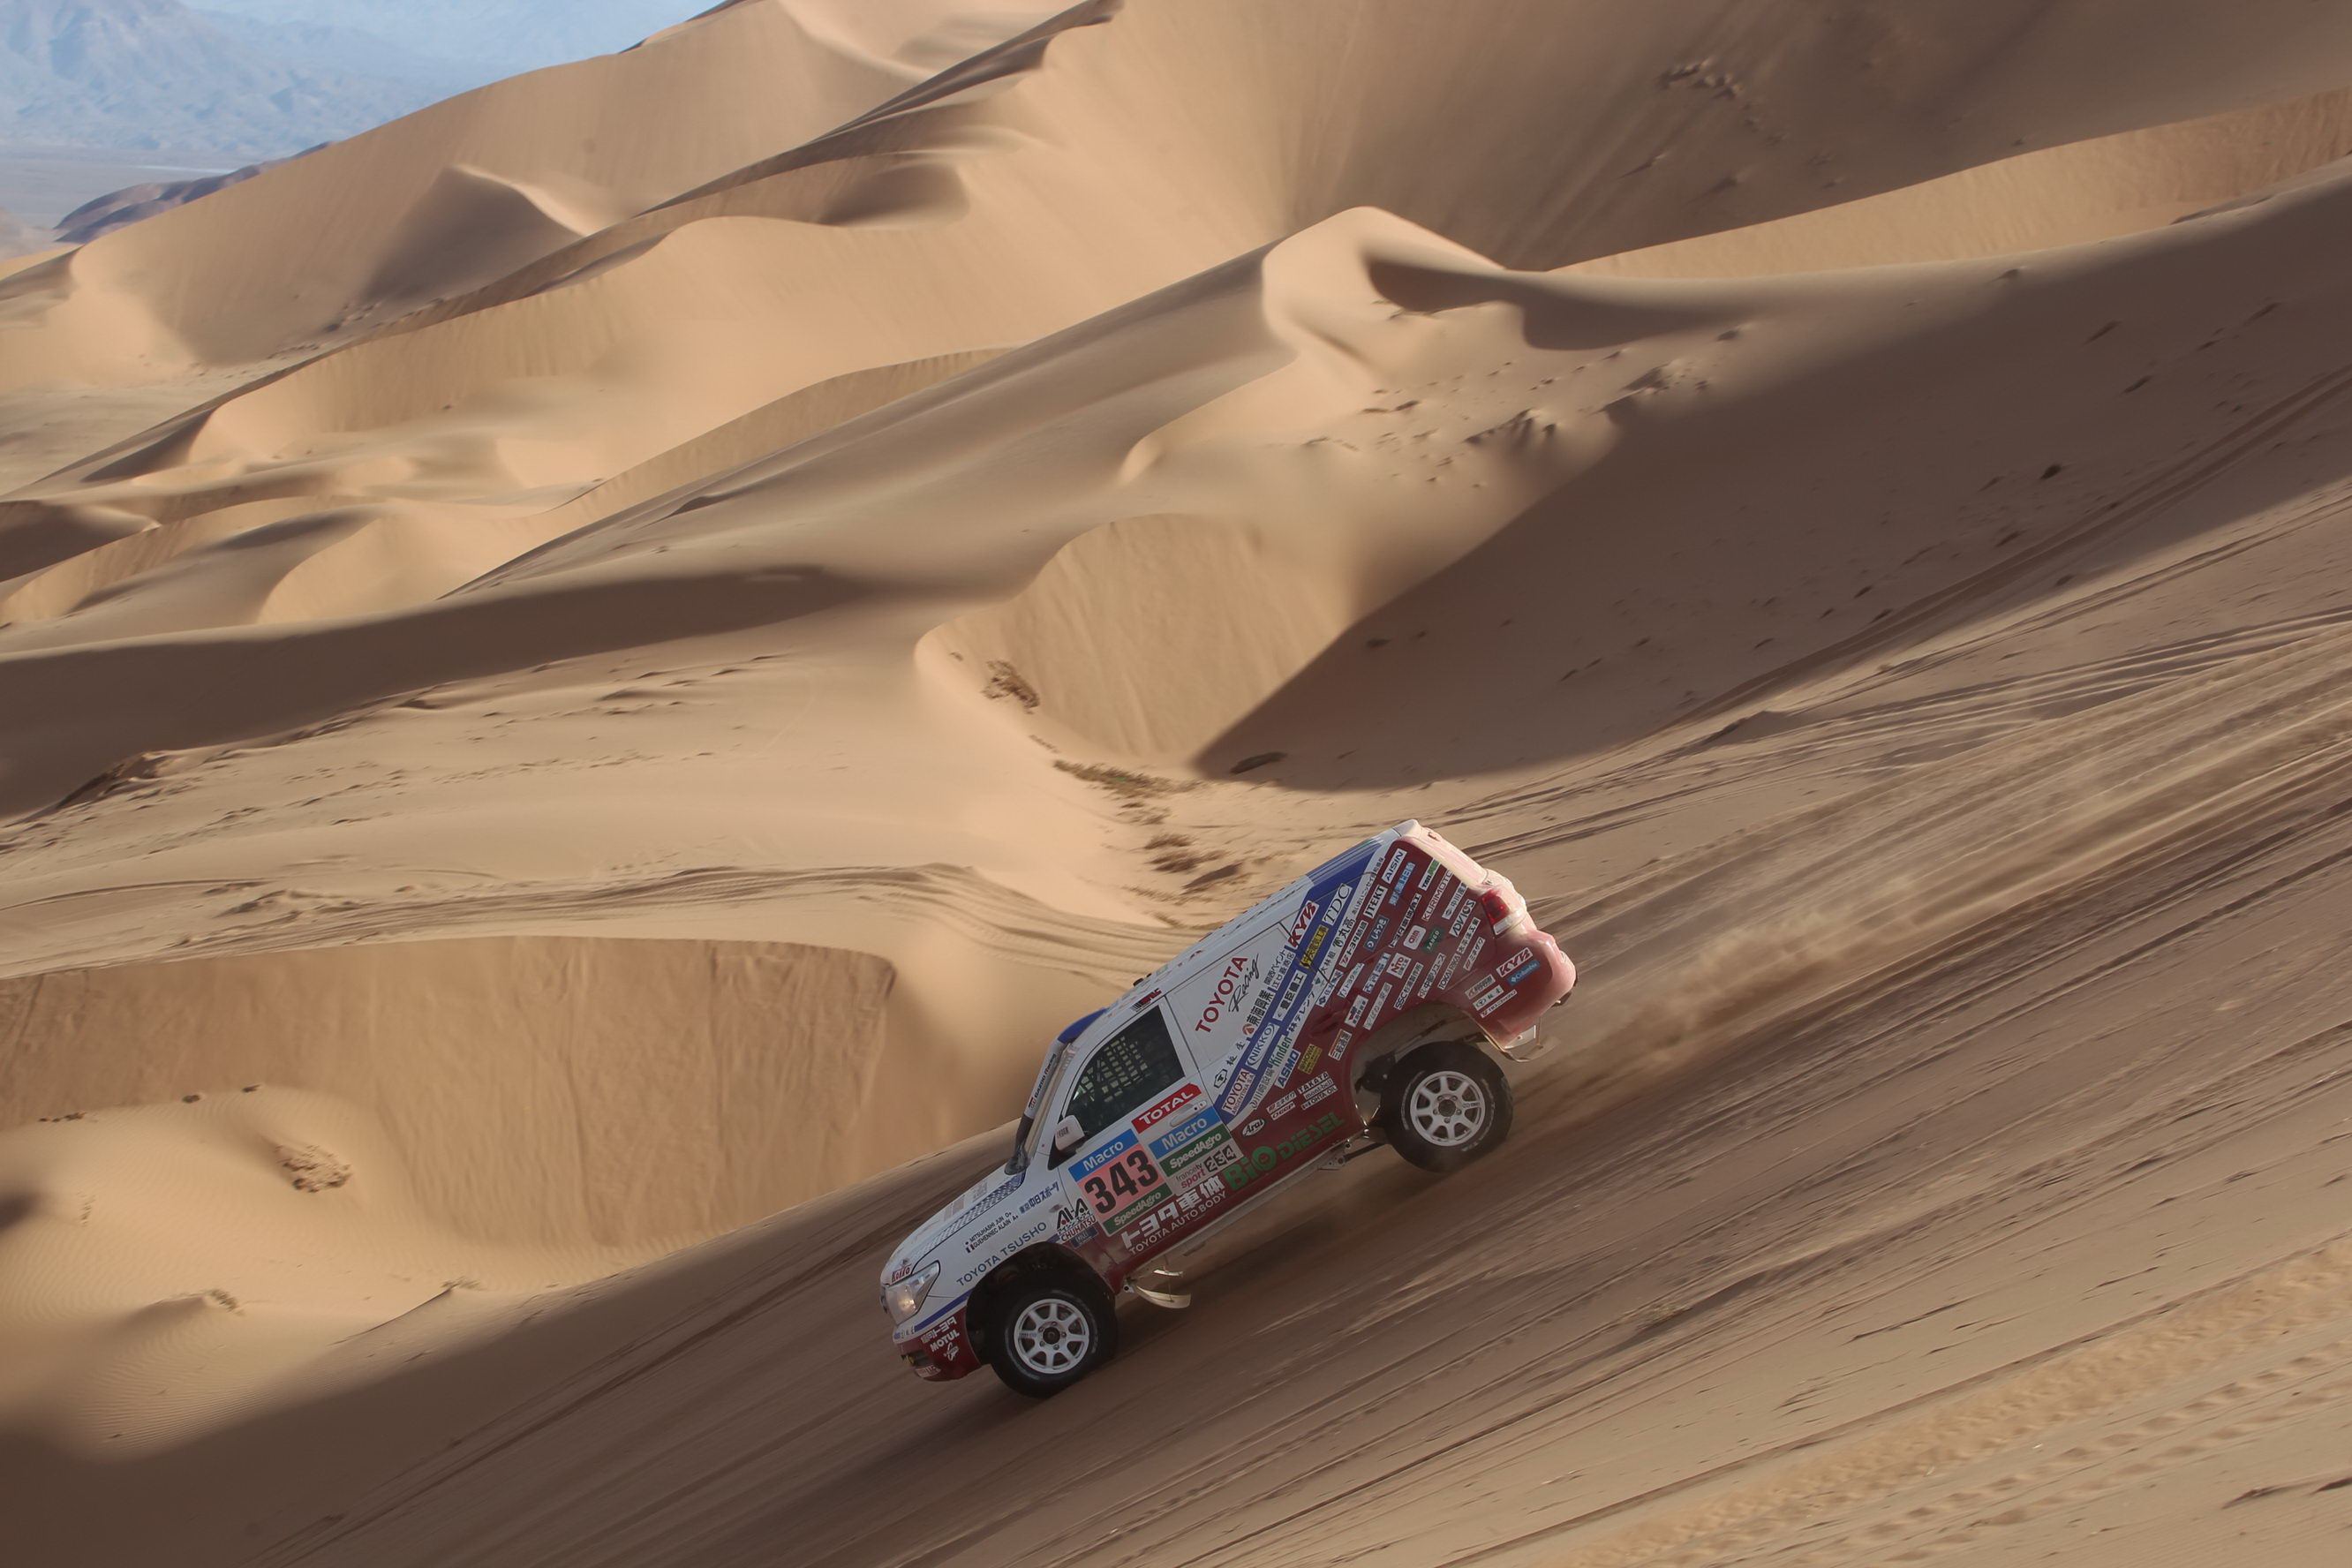 They raced through Argentina to Chile, going over the Andes dunes